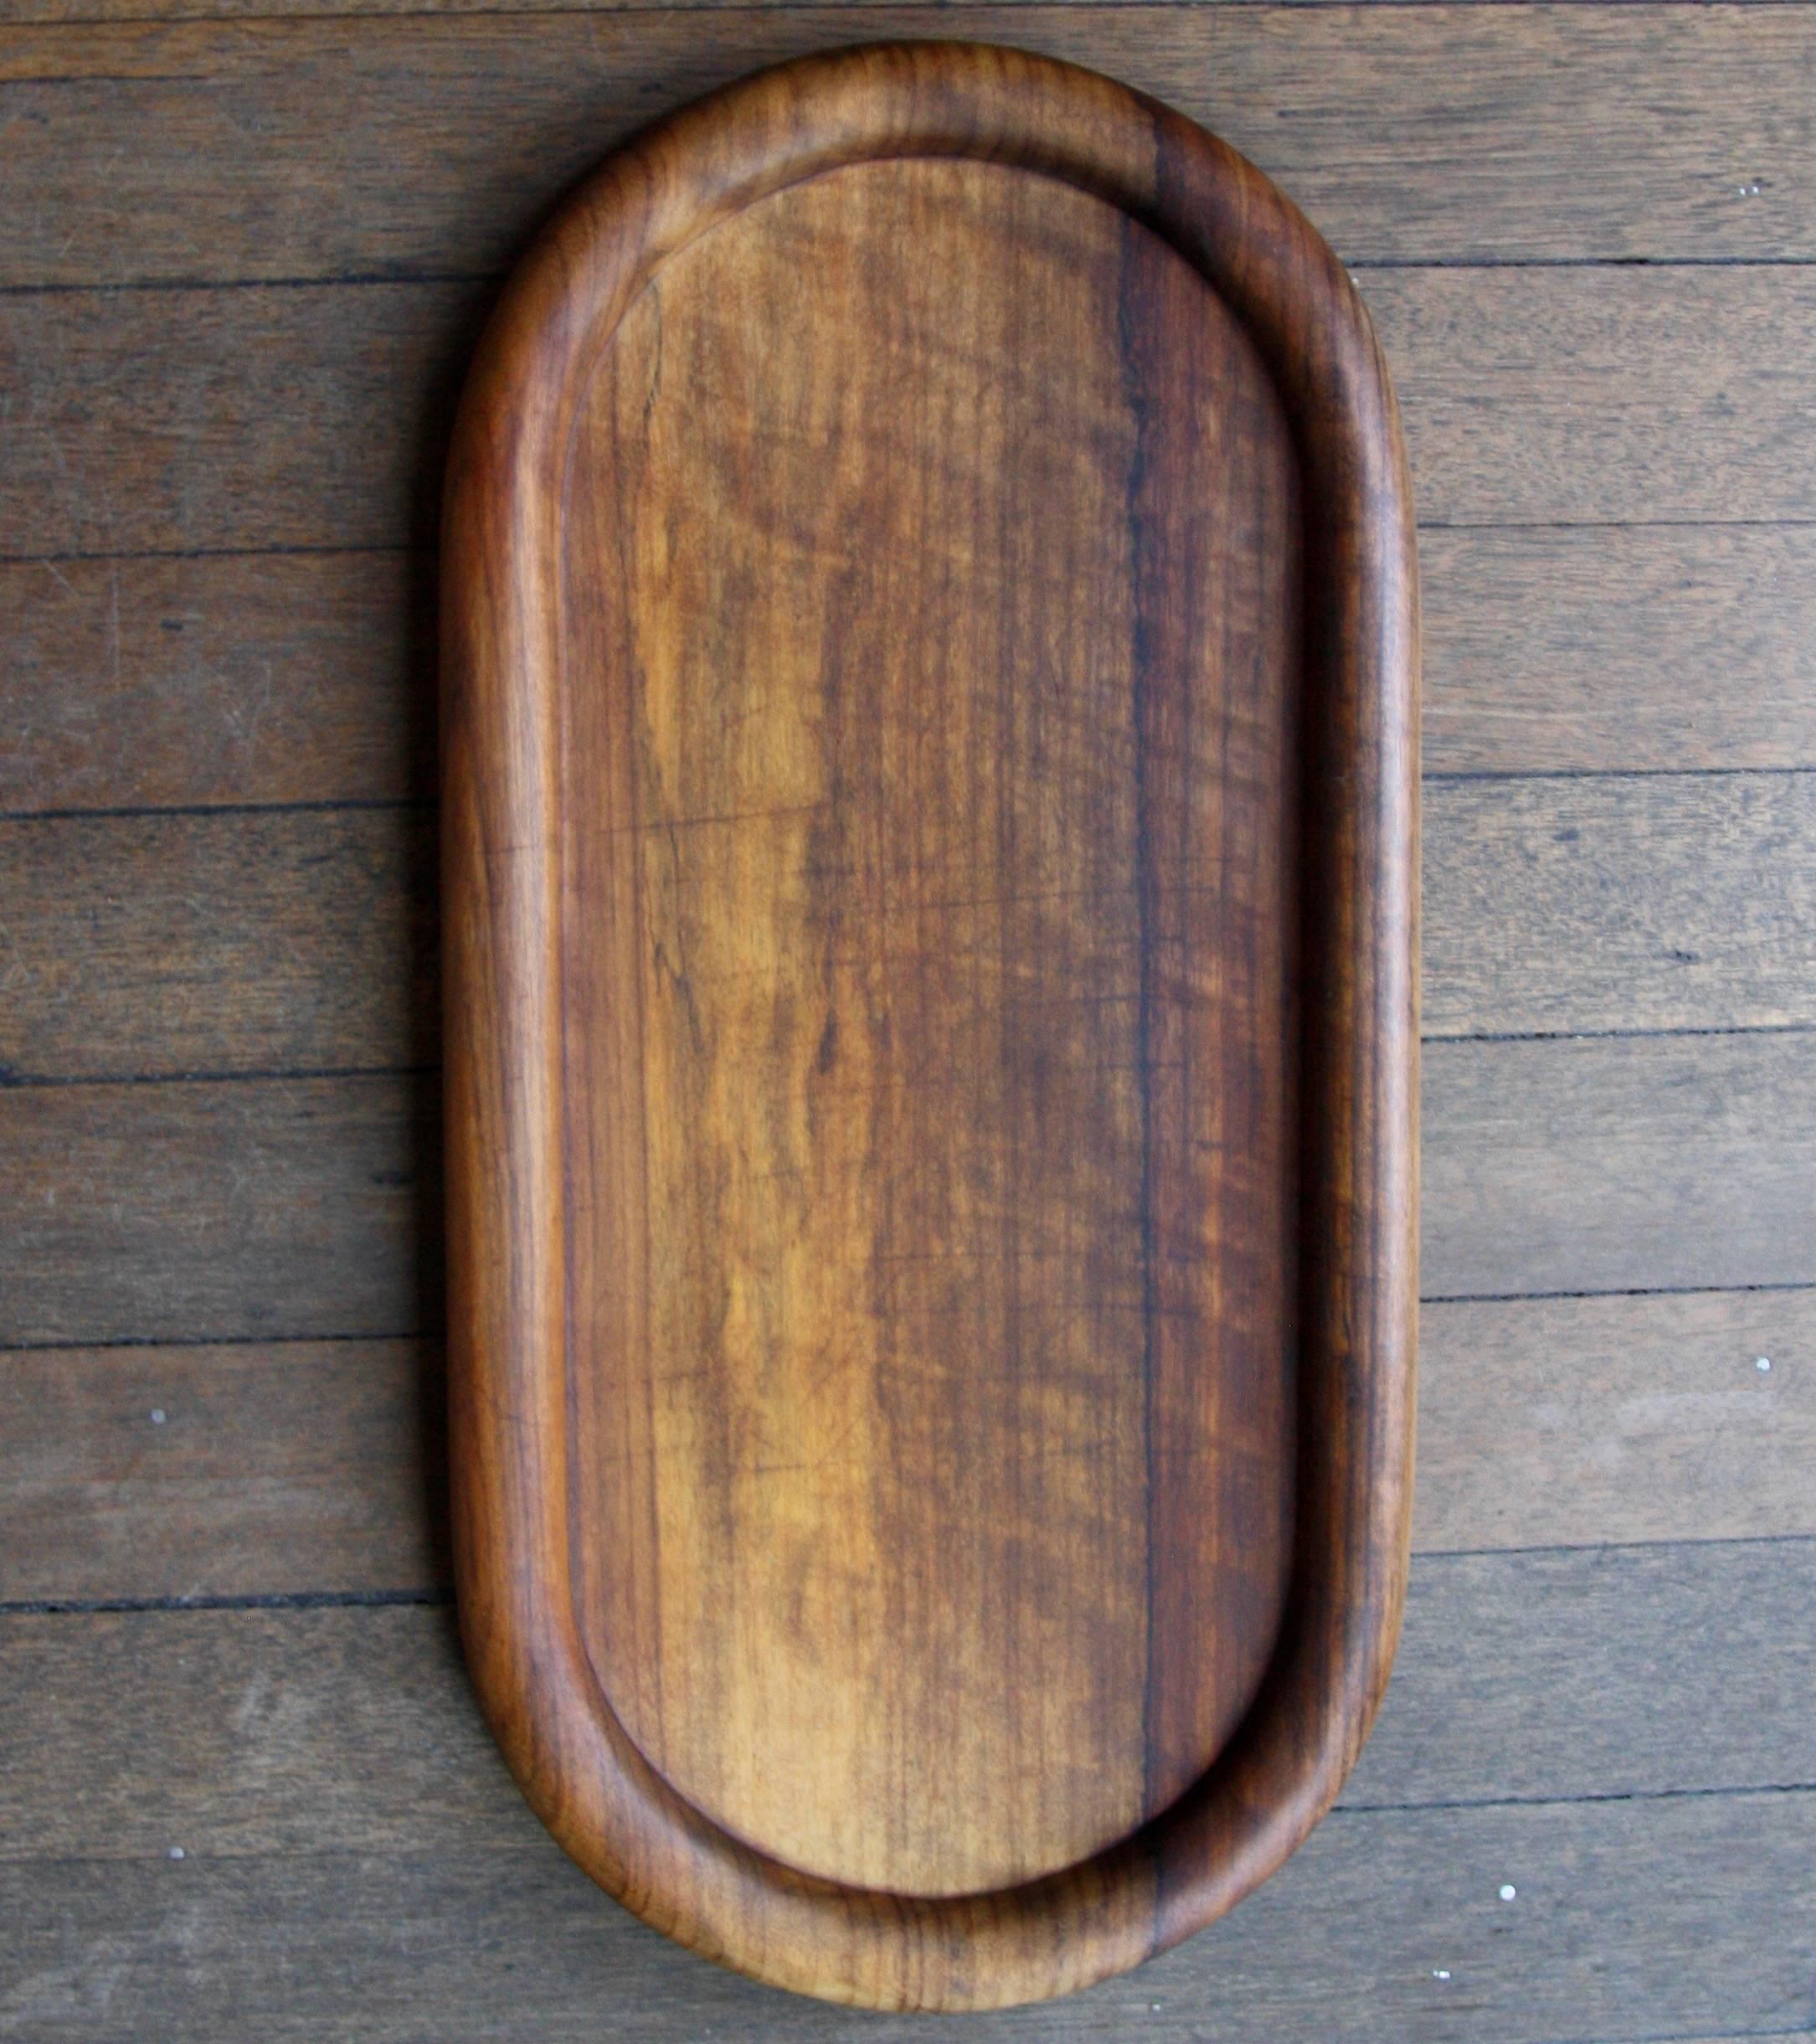 A large cutting board or serving tray in solid walnut. The sculpted platter was designed and made by Carl Auböck III at the Auböck werkstätte in Vienna in the 1980s. The thick but flowing rim to the piece makes it ideal for use as a cutting board as